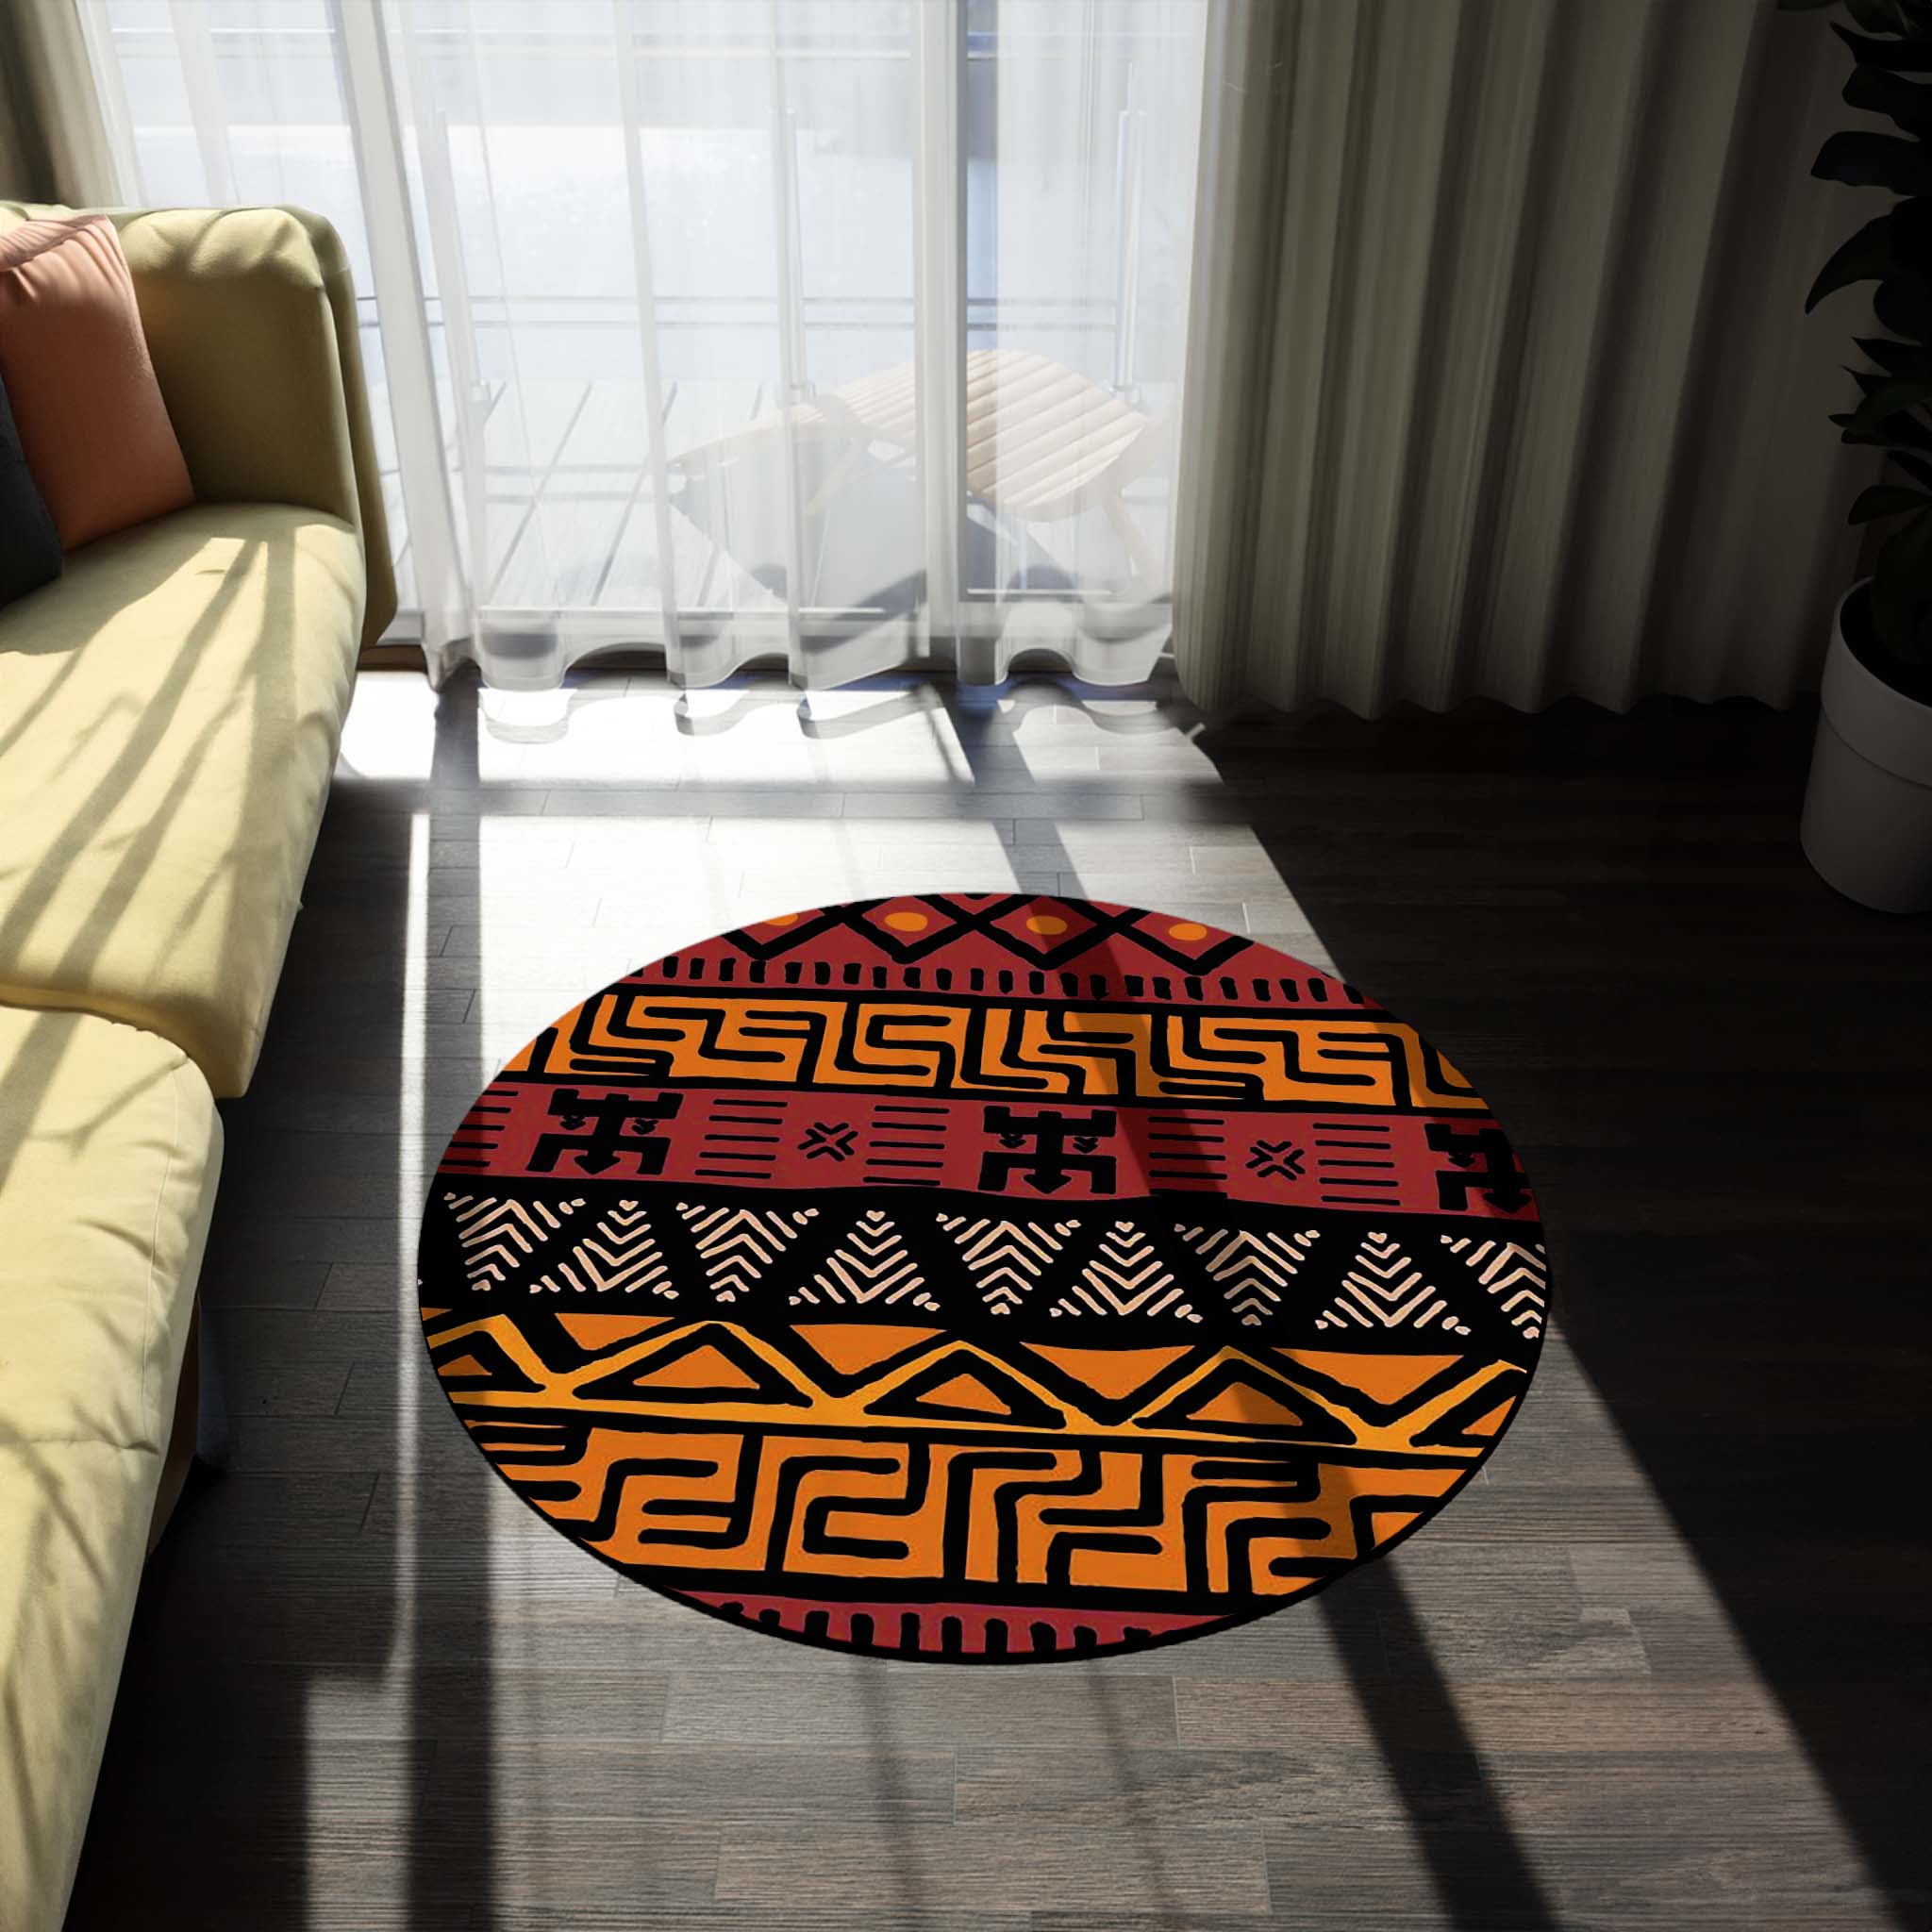 Mudcloth Round Rug African Multicoloured Carpet - Bynelo